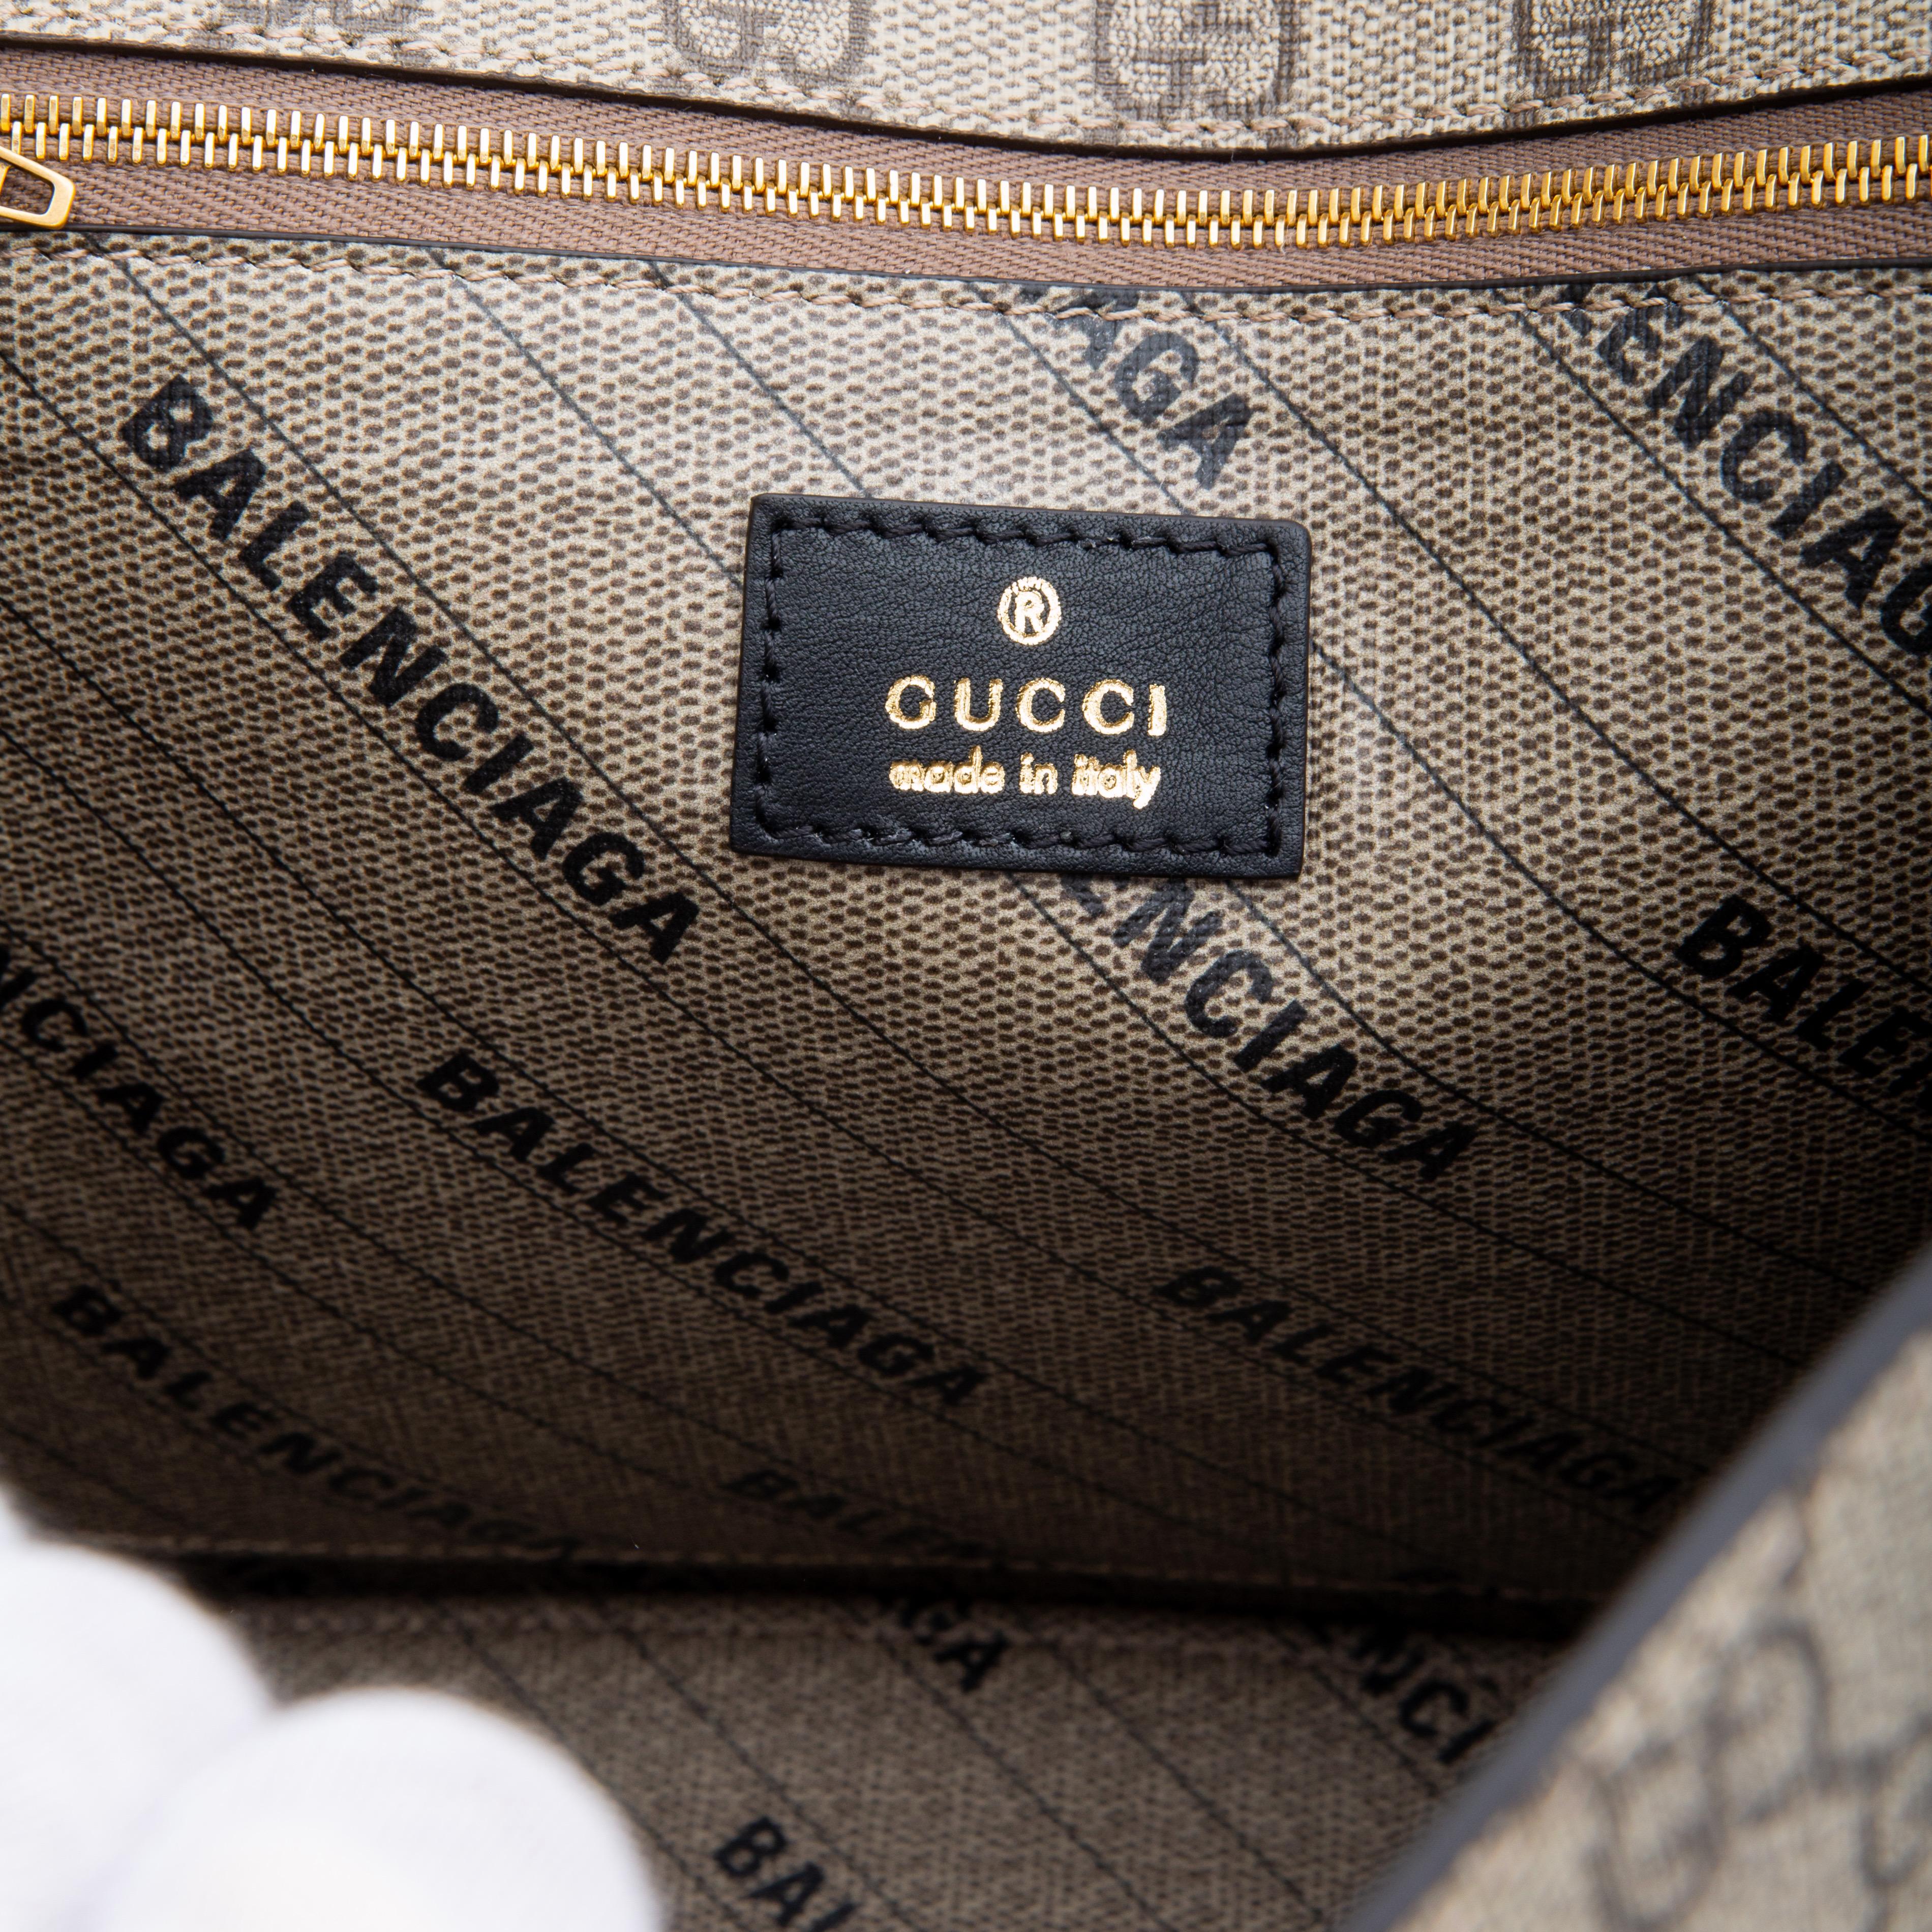 Gucci x Balenciaga The Hacker Project Hourglass Bag Medium (681696) In New Condition For Sale In Montreal, Quebec